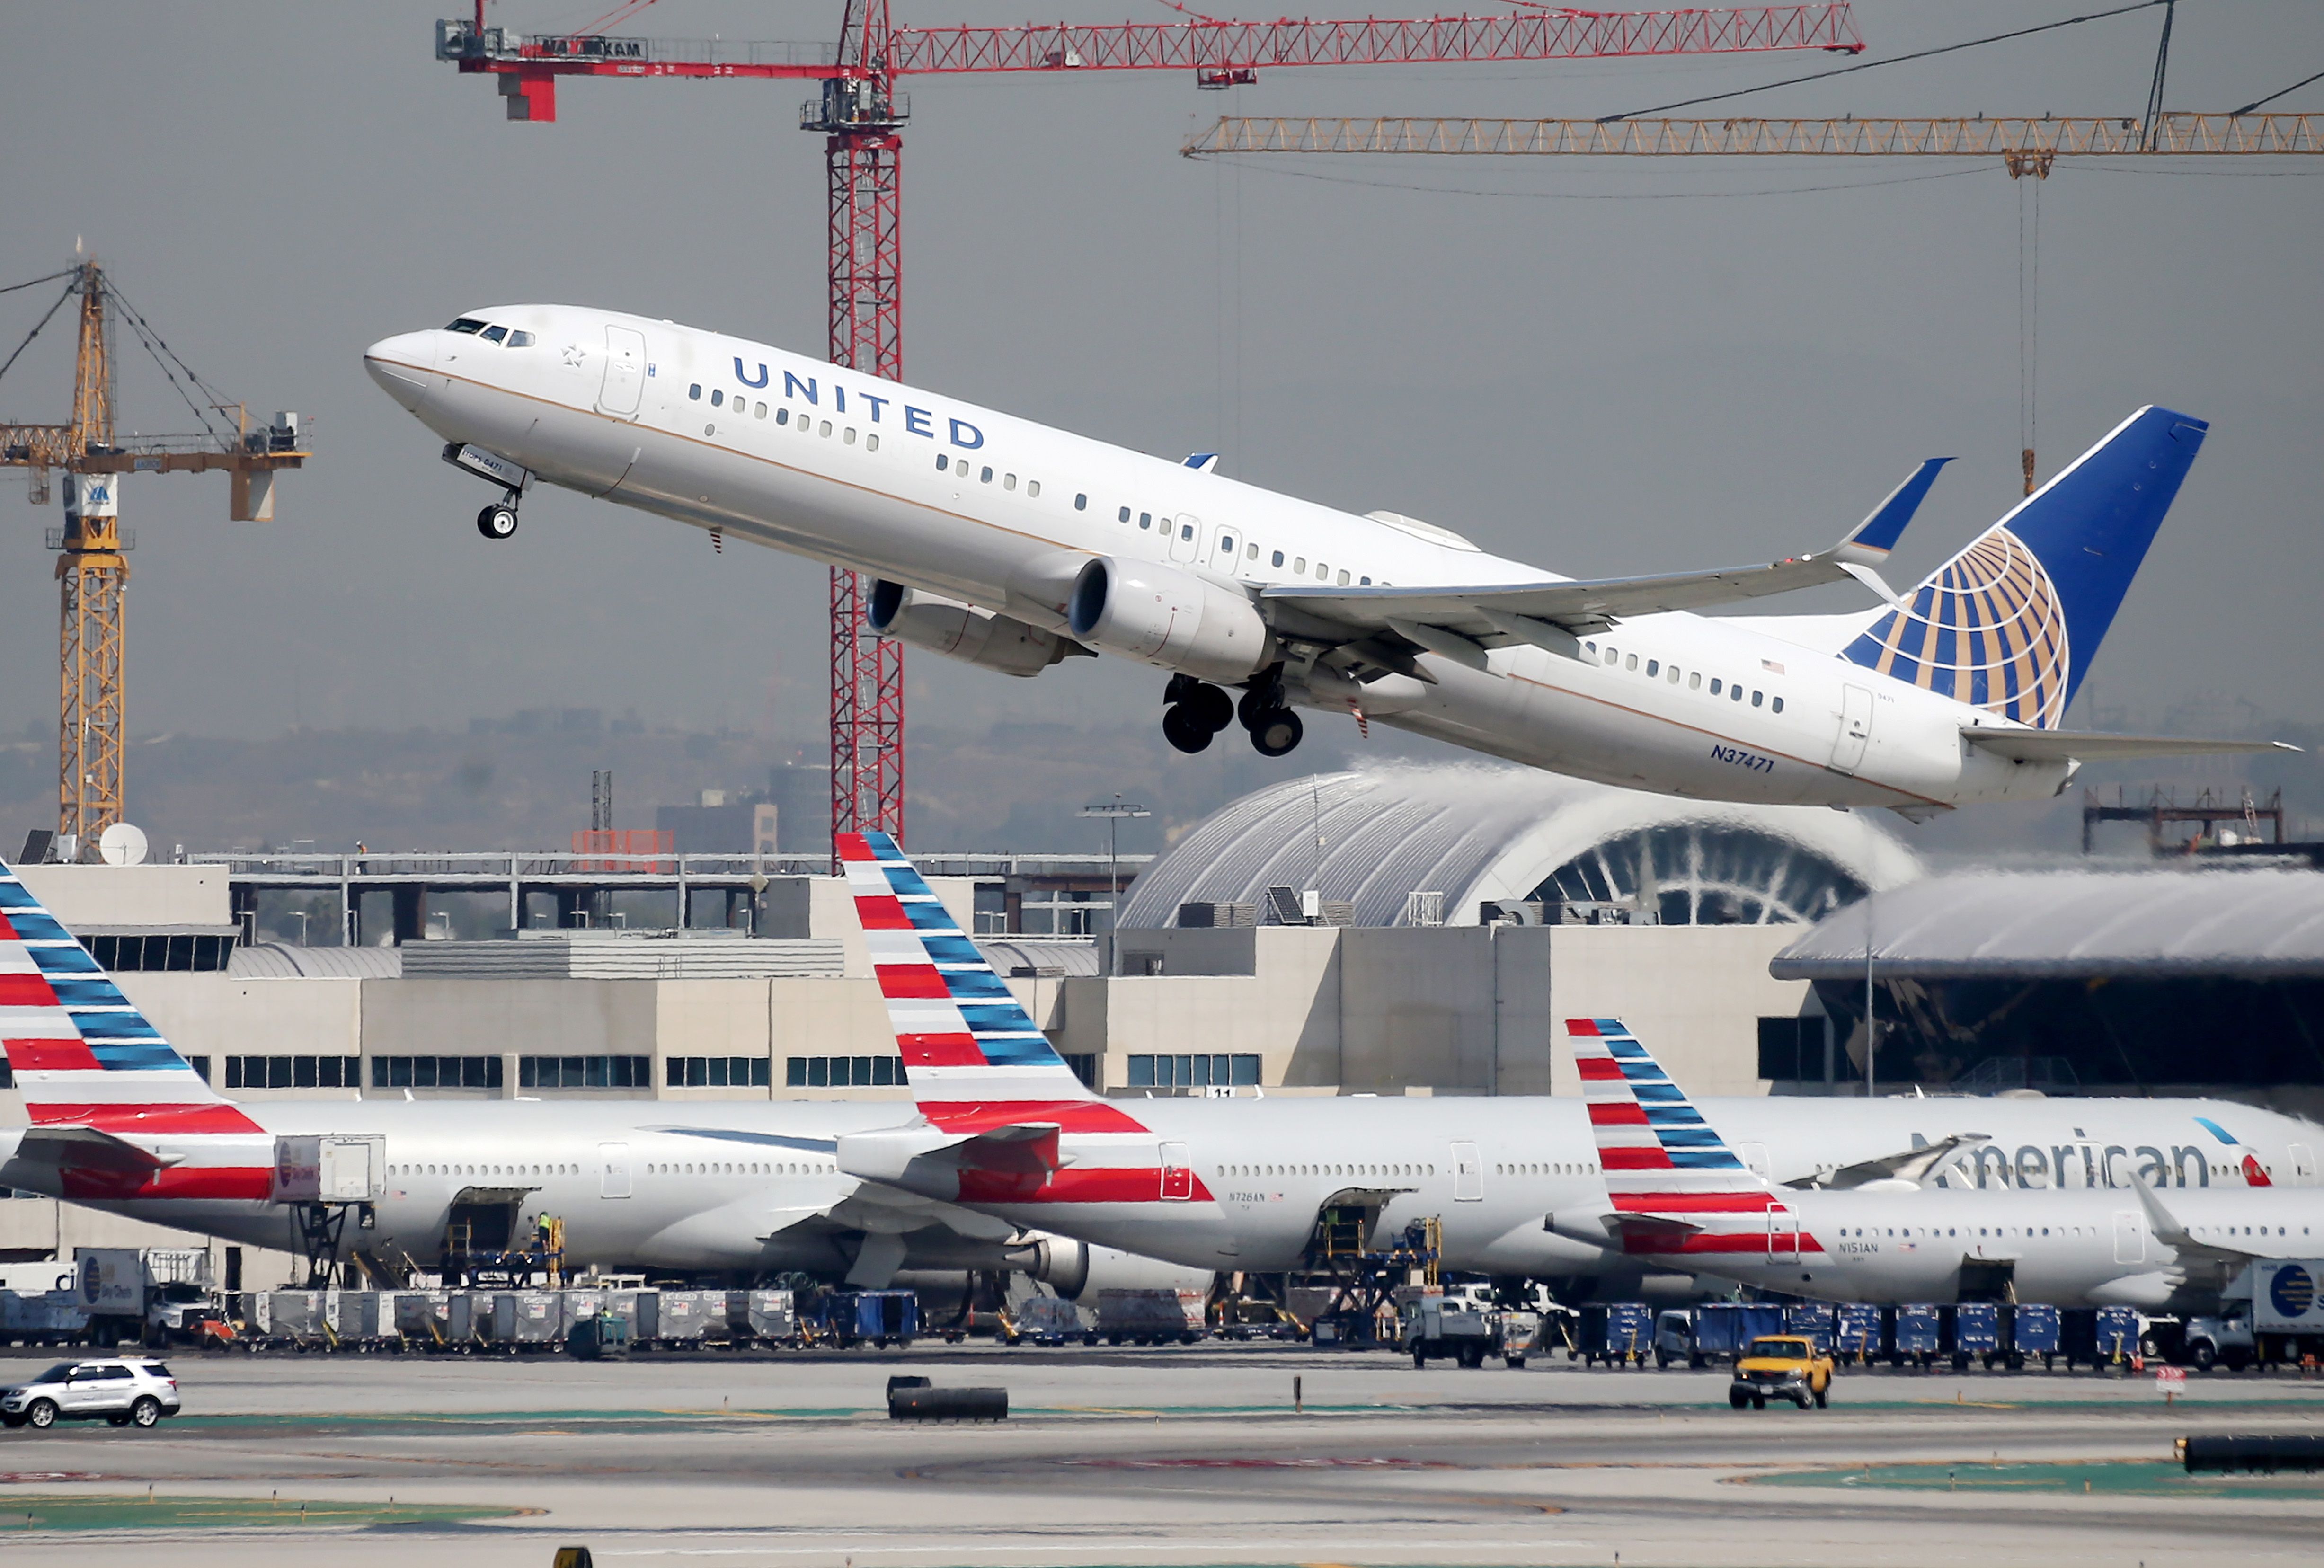 United Airlines Airplane overflies American Airlines Airplanes at Airport 